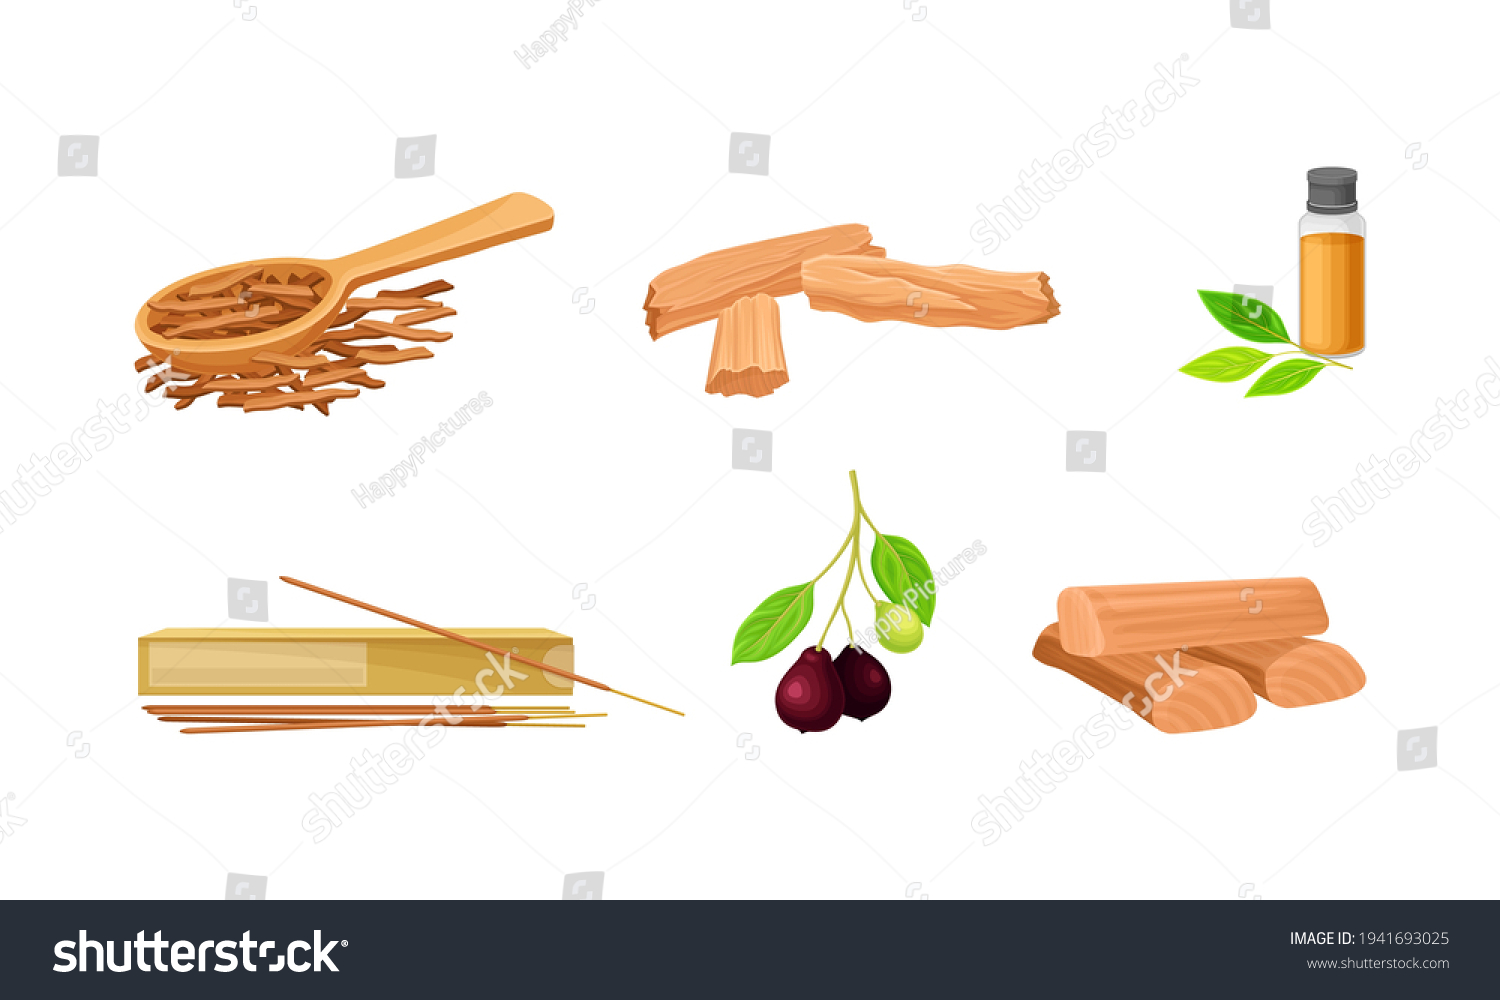 Sandalwood Timber and Wood Material with Fragrant Chip and Sticks Vector Set #1941693025